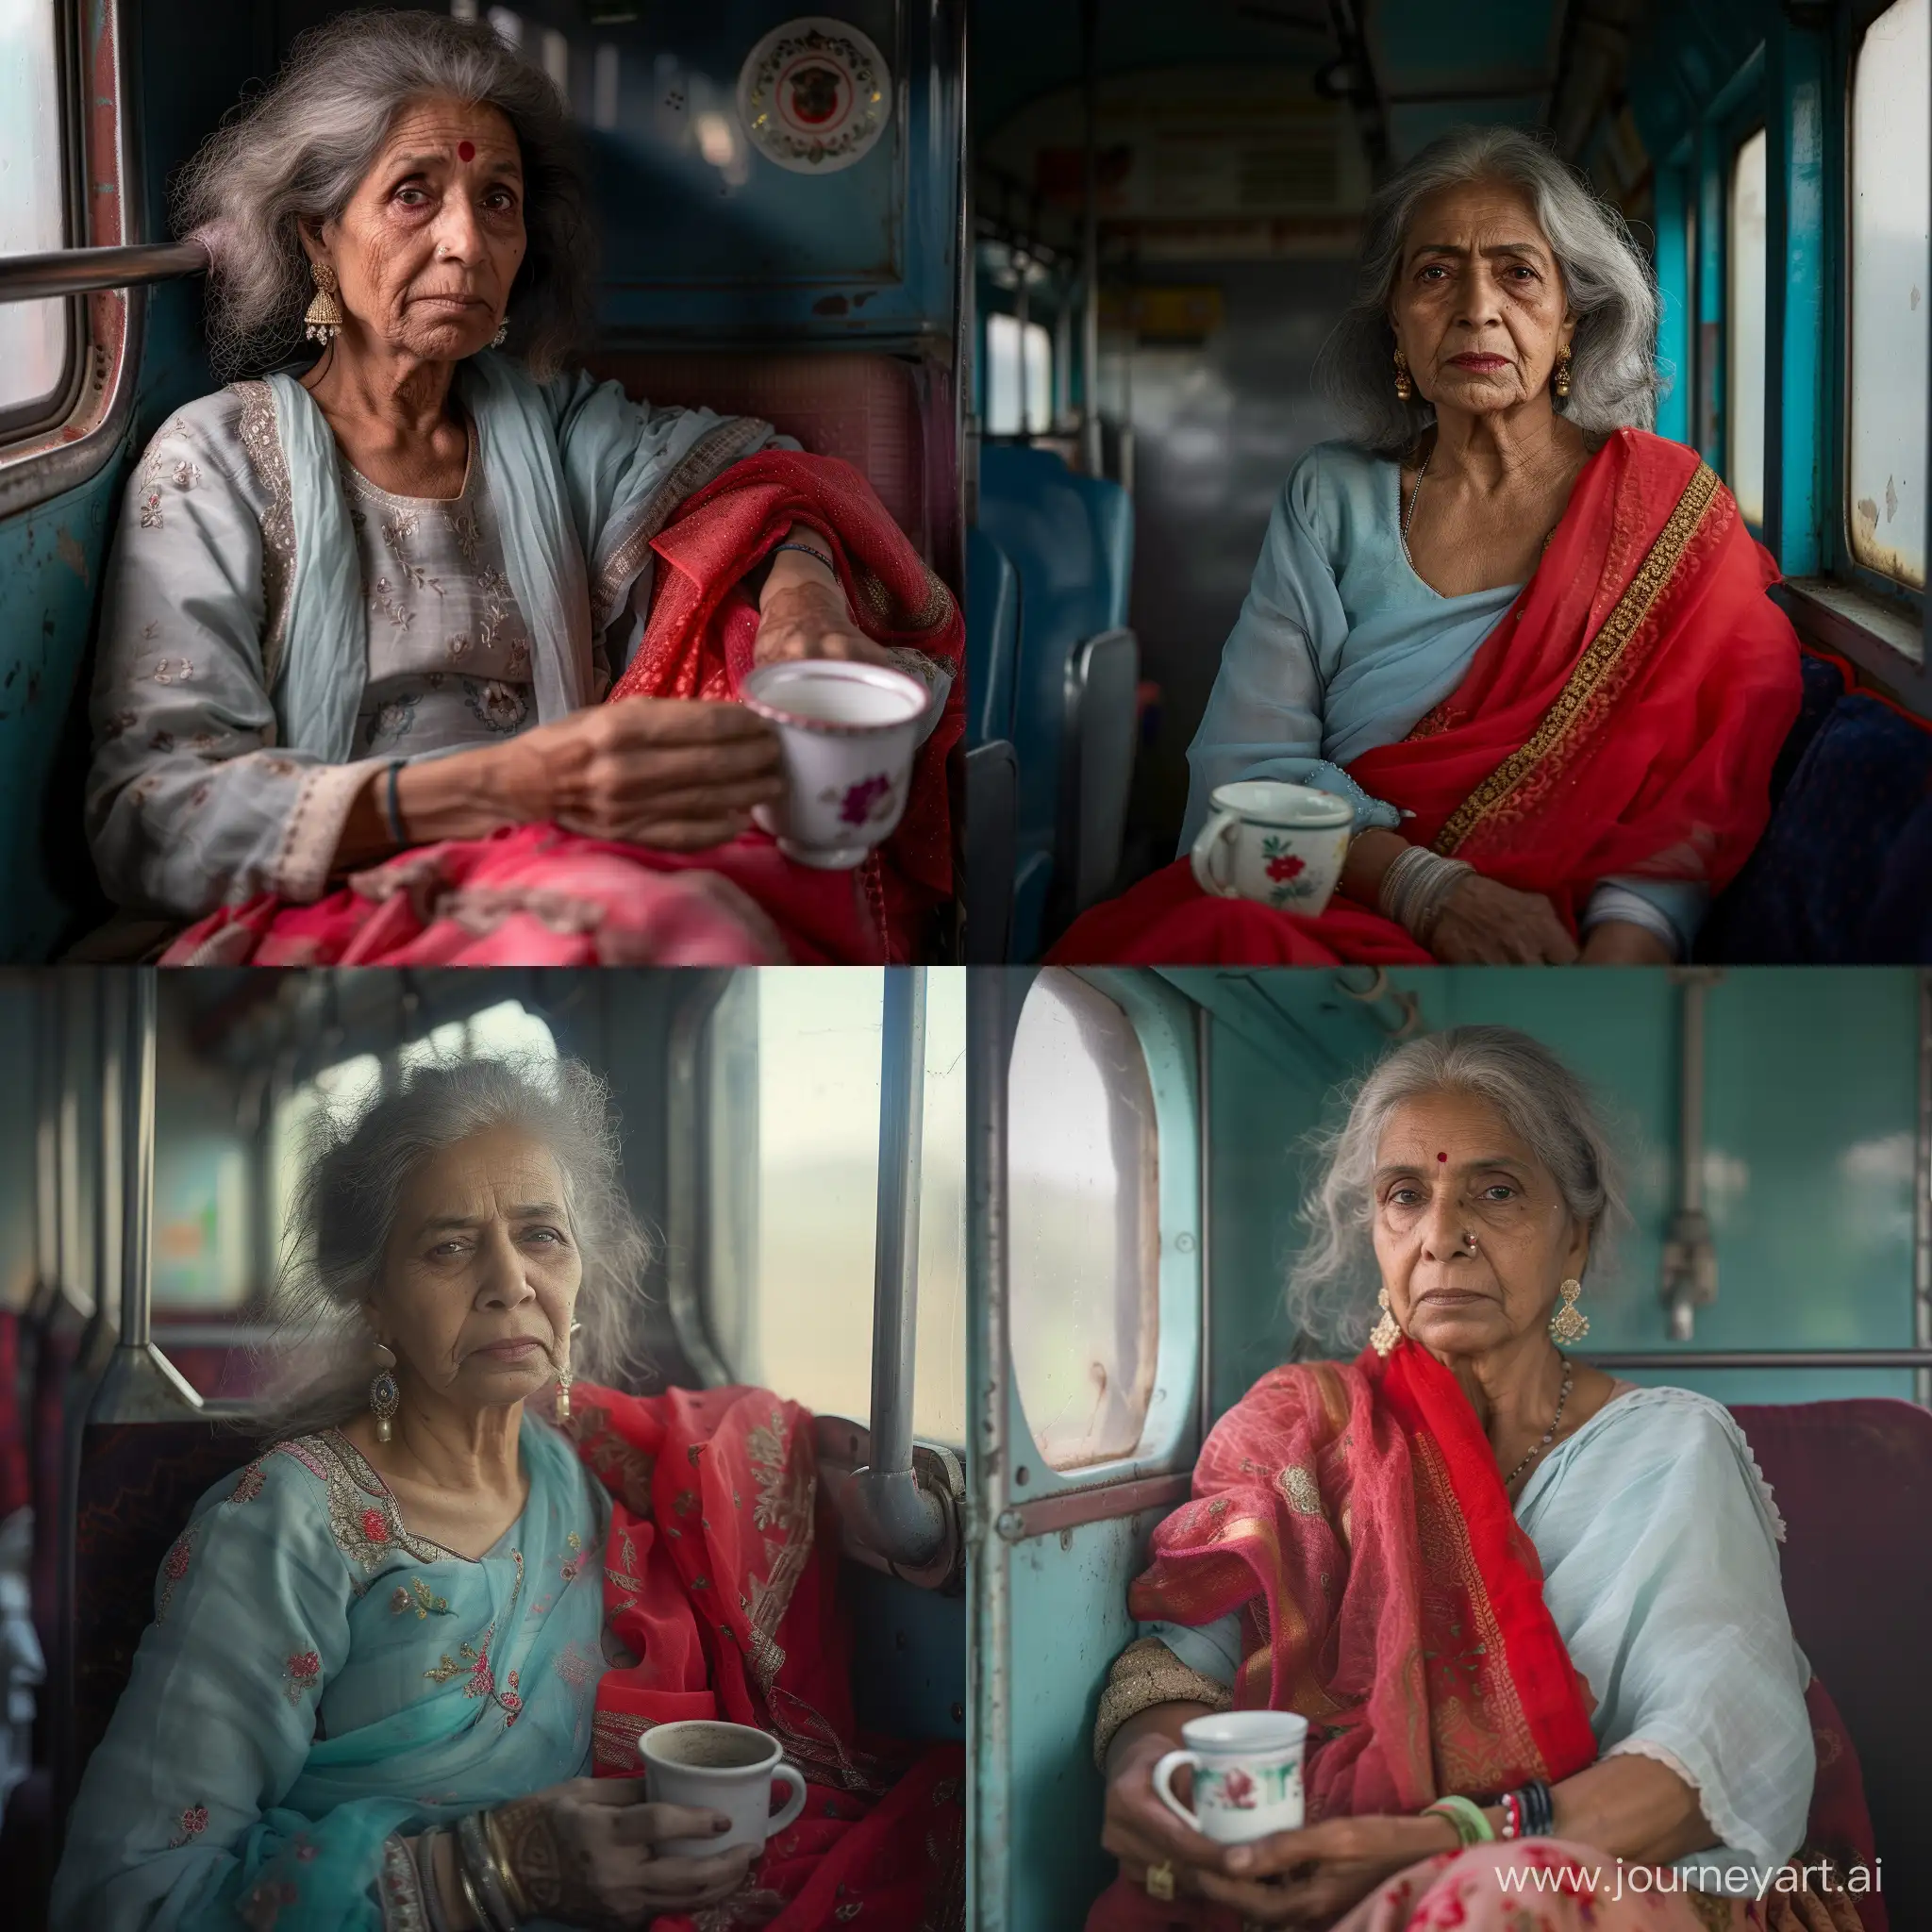 Elegant-50YearOld-Indian-Woman-Crafting-Tea-in-Traditional-Attire-on-Vintage-Train